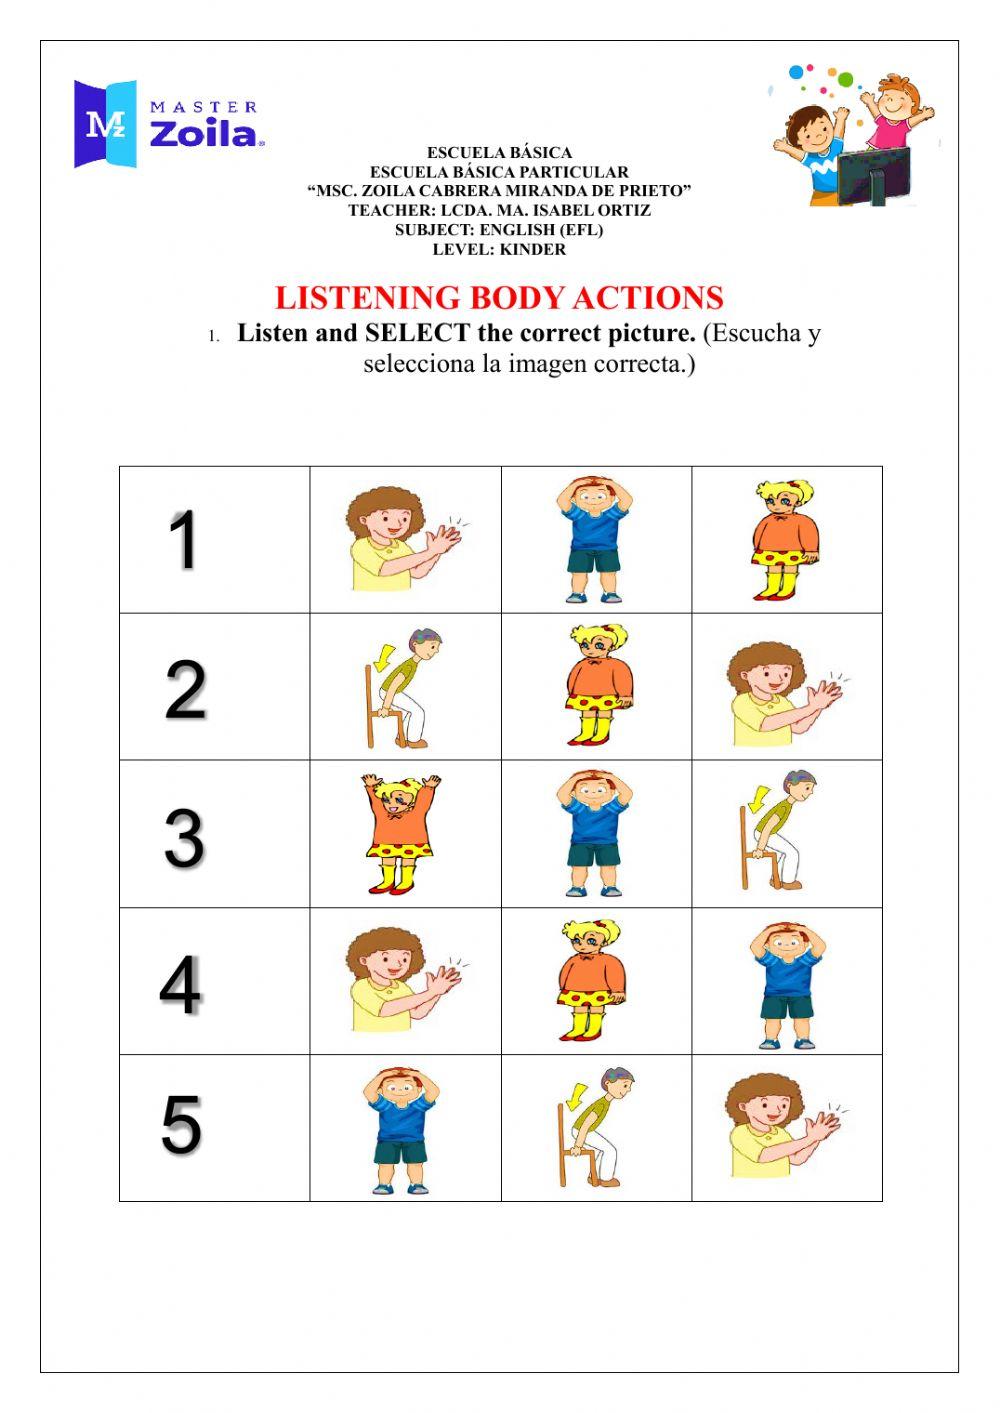 Body actions